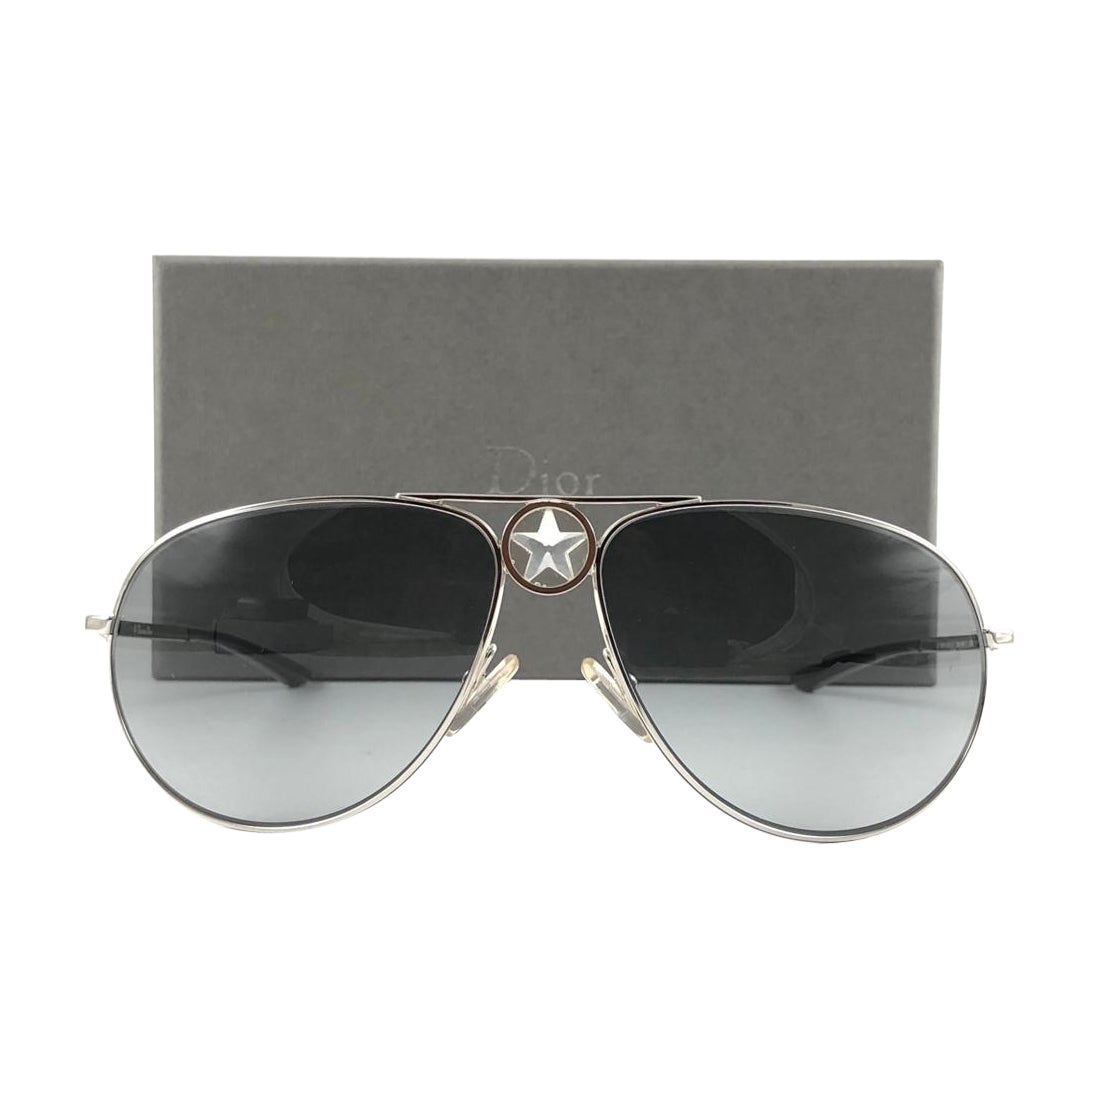 Vintage Christian Dior " HIPPY 1 " Silver Wrap Sunglasses Fall 2000 Y2K For Sale